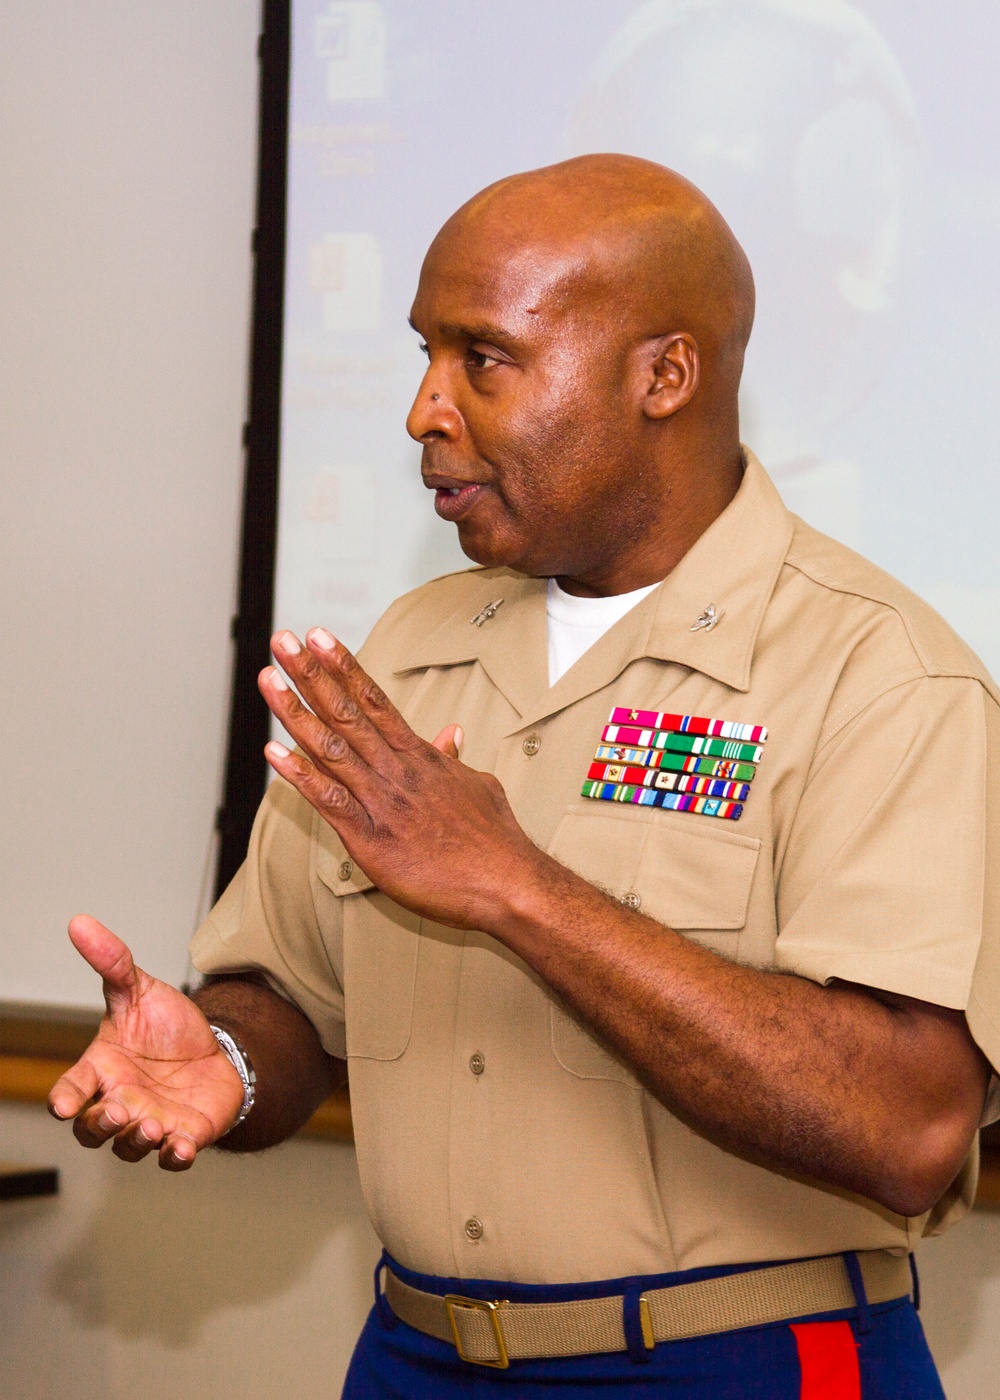 VCU students receive leadership lessons from Marines